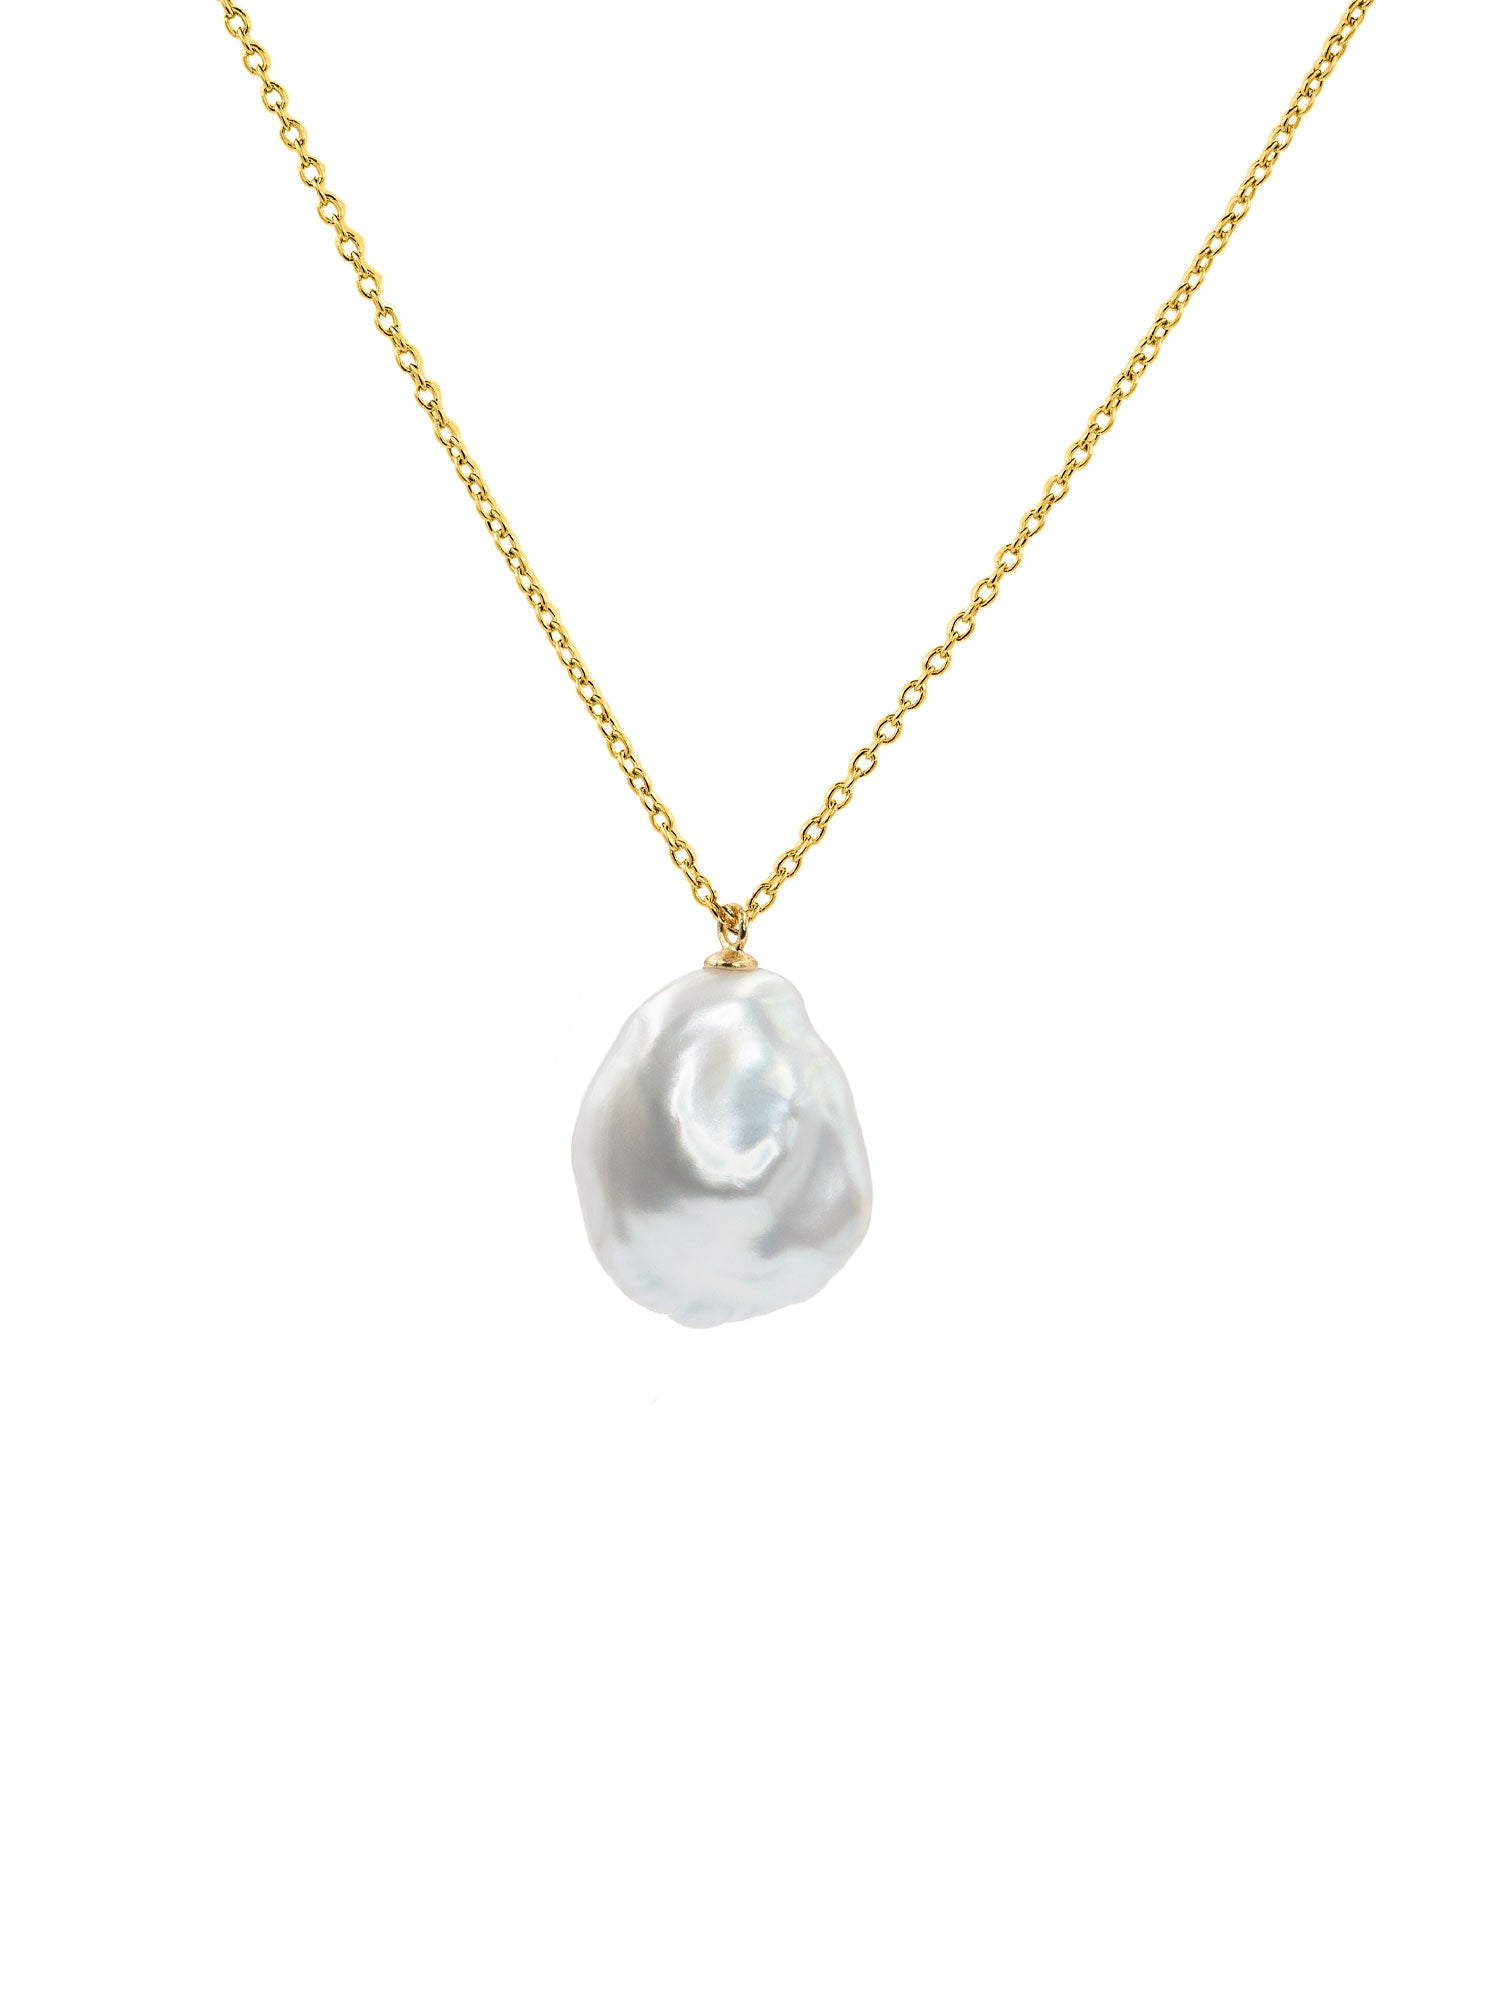 Keshi Freshwater Cultured Pearl Pendant 14-16 mm and 18K Gold S